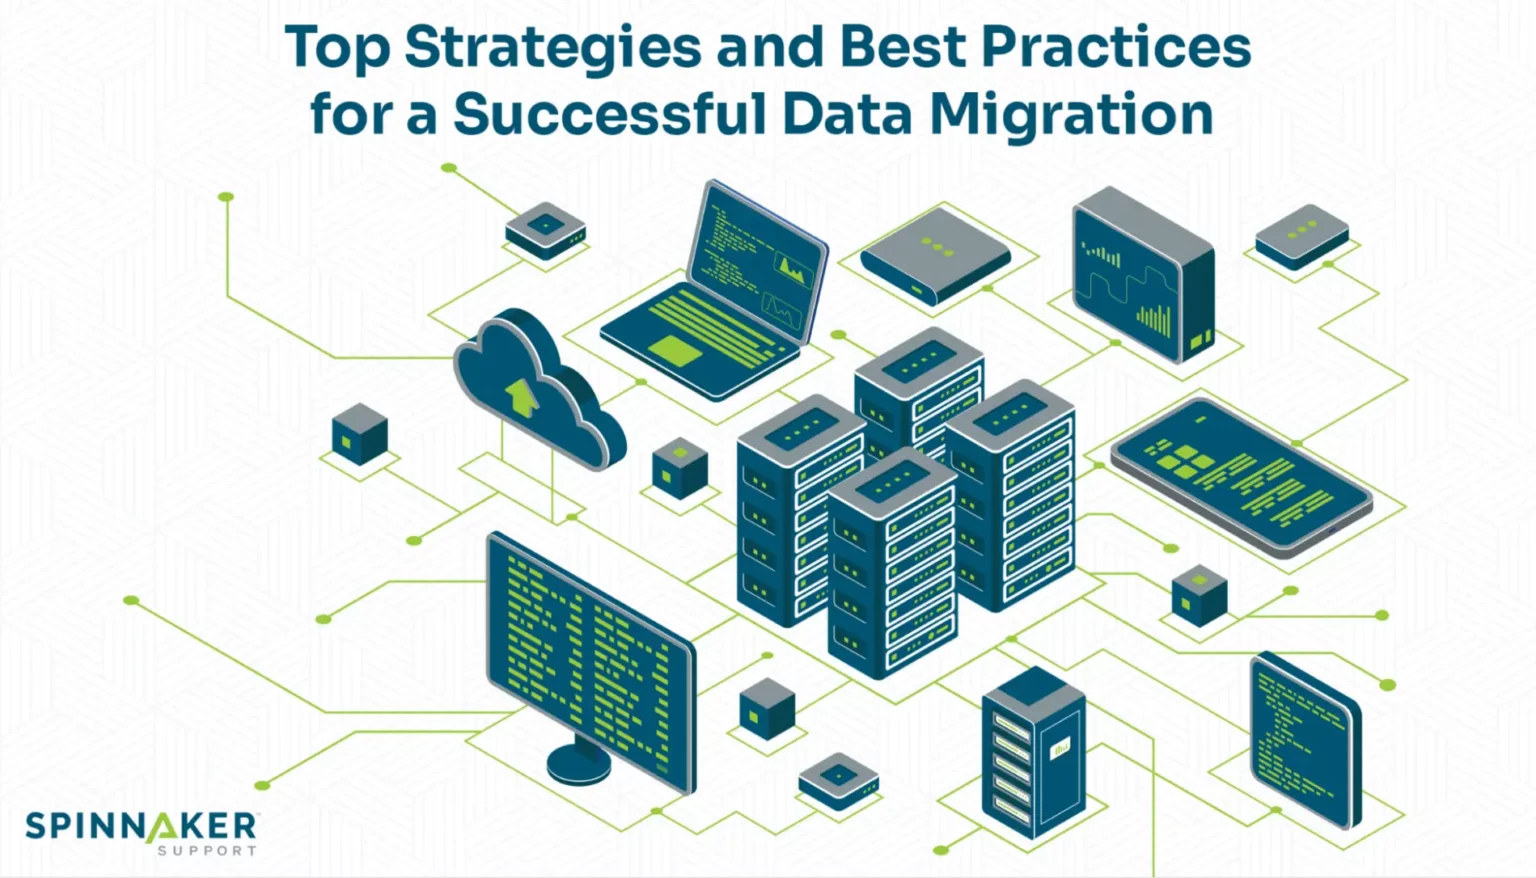 Strategies and best practices for a successful data migration